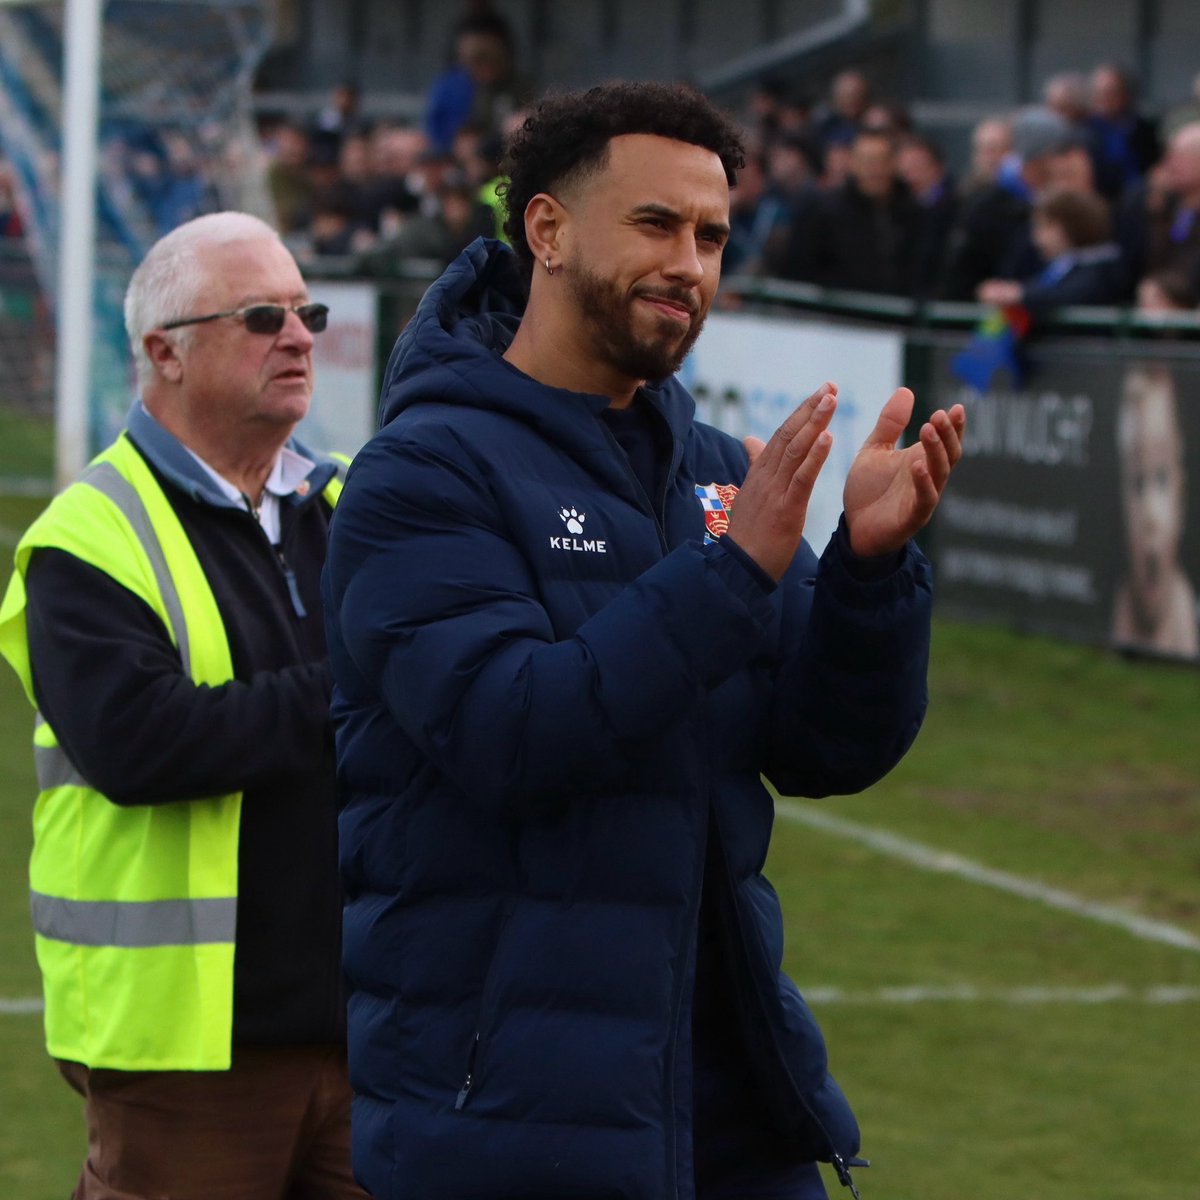 Humbled and honored to step into the role of manager at @wealdstone_fc until the end of the season. I will give my all to help lead our team to safety over these next 5 games. With all of your support, I truly believe we can overcome our current situation. Matthew 19:26 🙏🏽💙